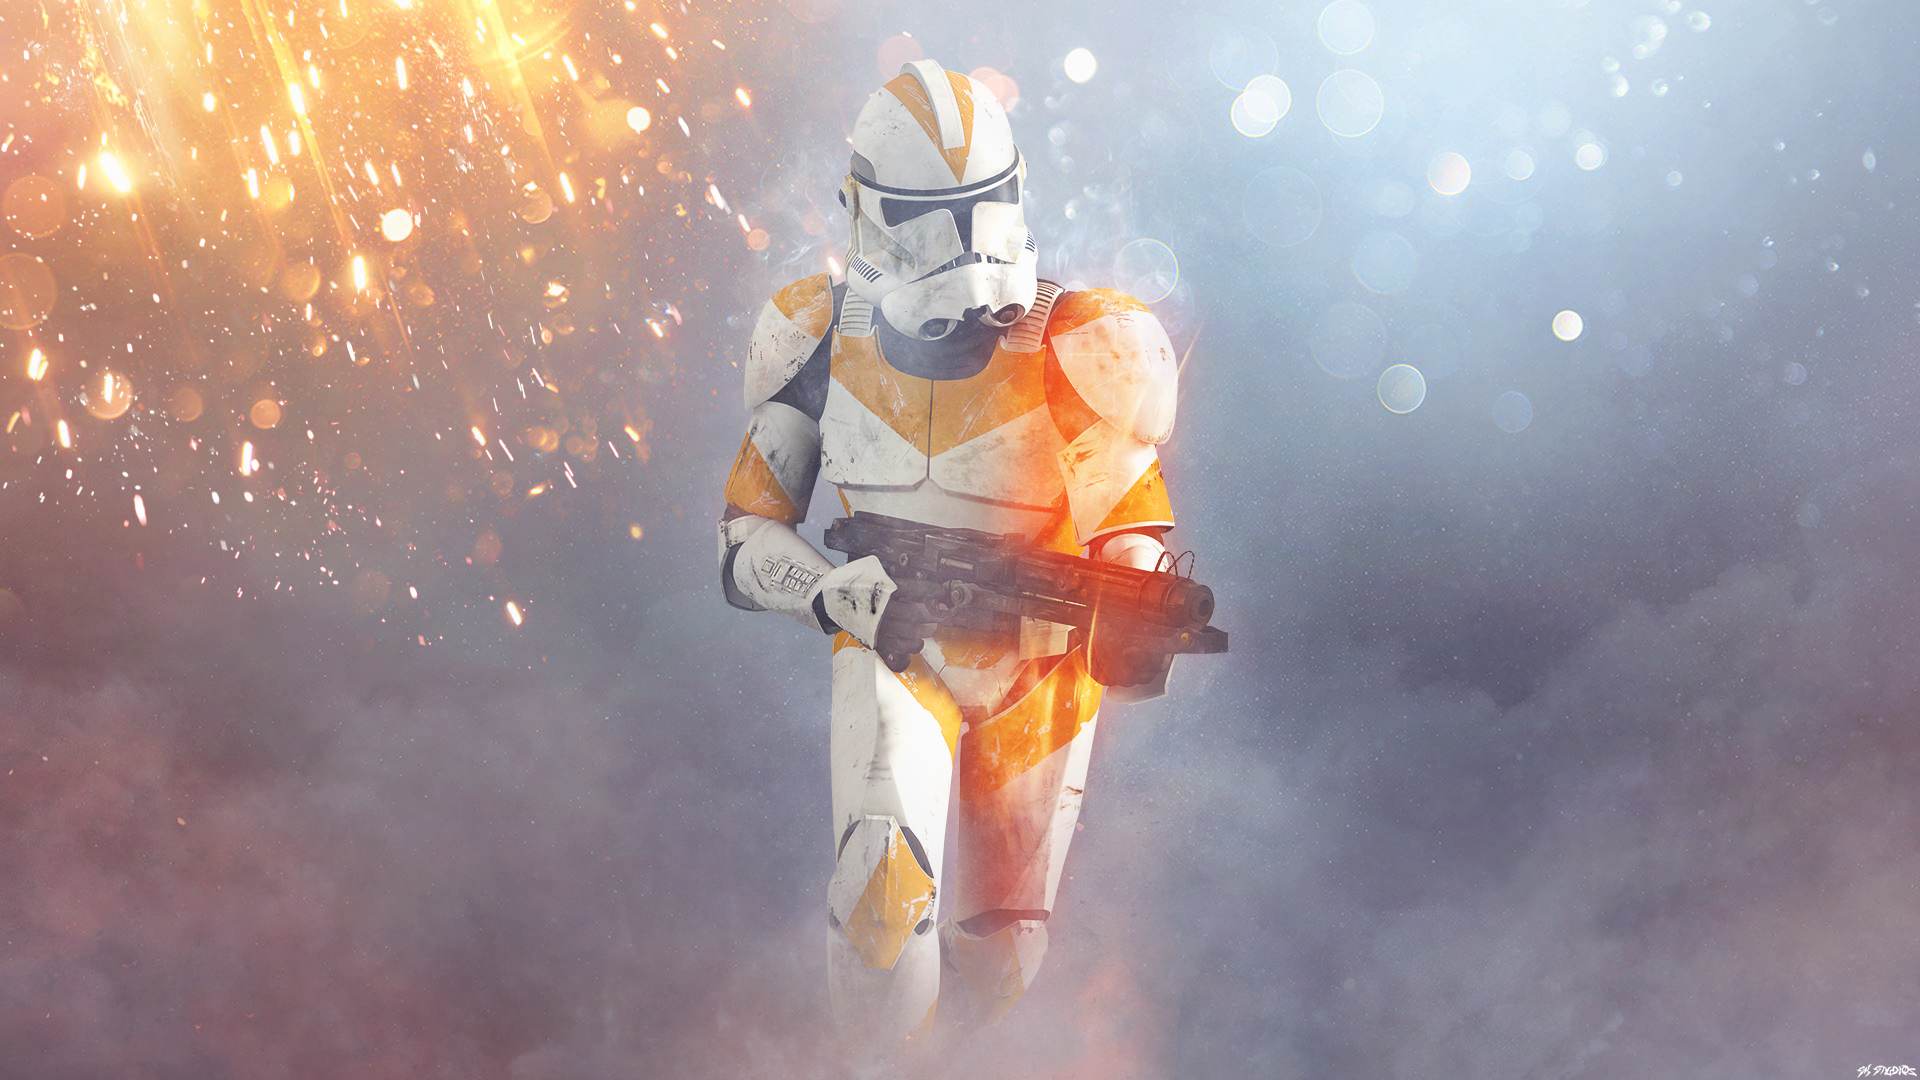 Stormtrooper Wallpapers Images Photos Pictures Backgrounds